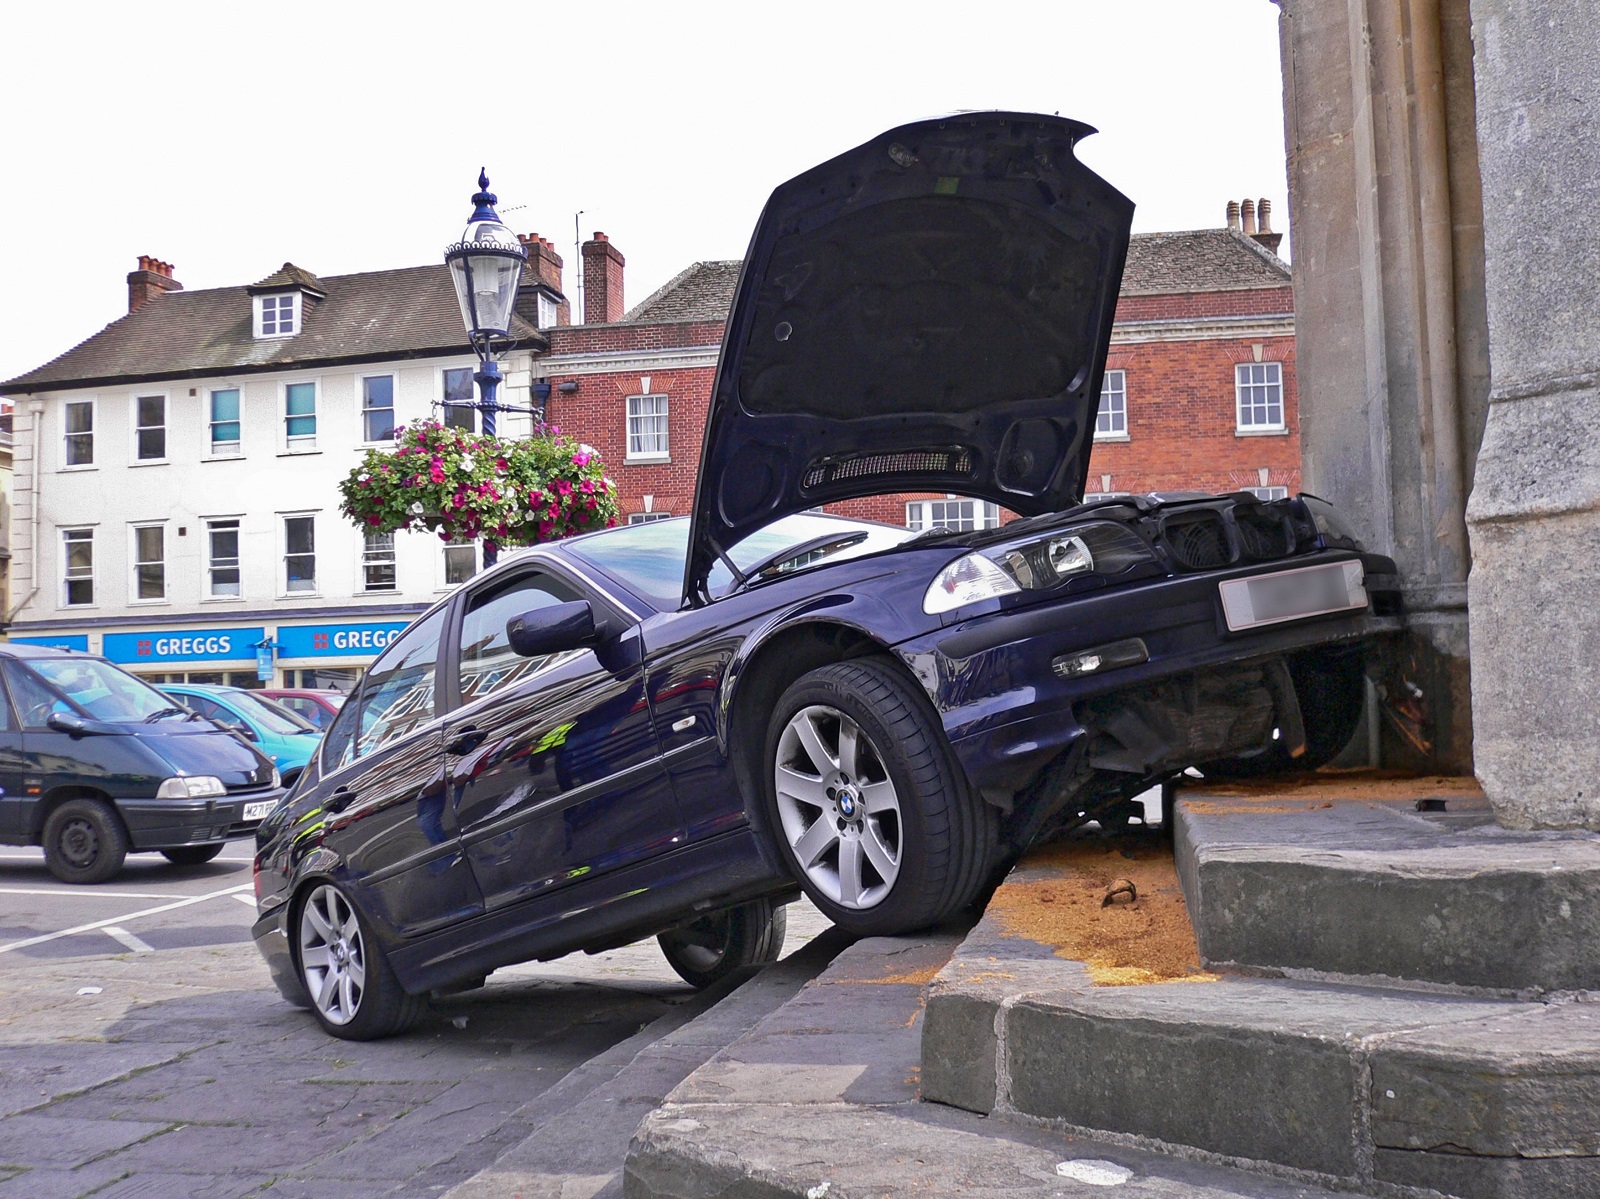 An orginal way to park a  The car over ran while trying to park and ran up the stone steps of the market cross, Image: 11399786, License: Rights-managed, Restrictions: , Model Release: no, Credit line: David Askham / Alamy / Profimedia